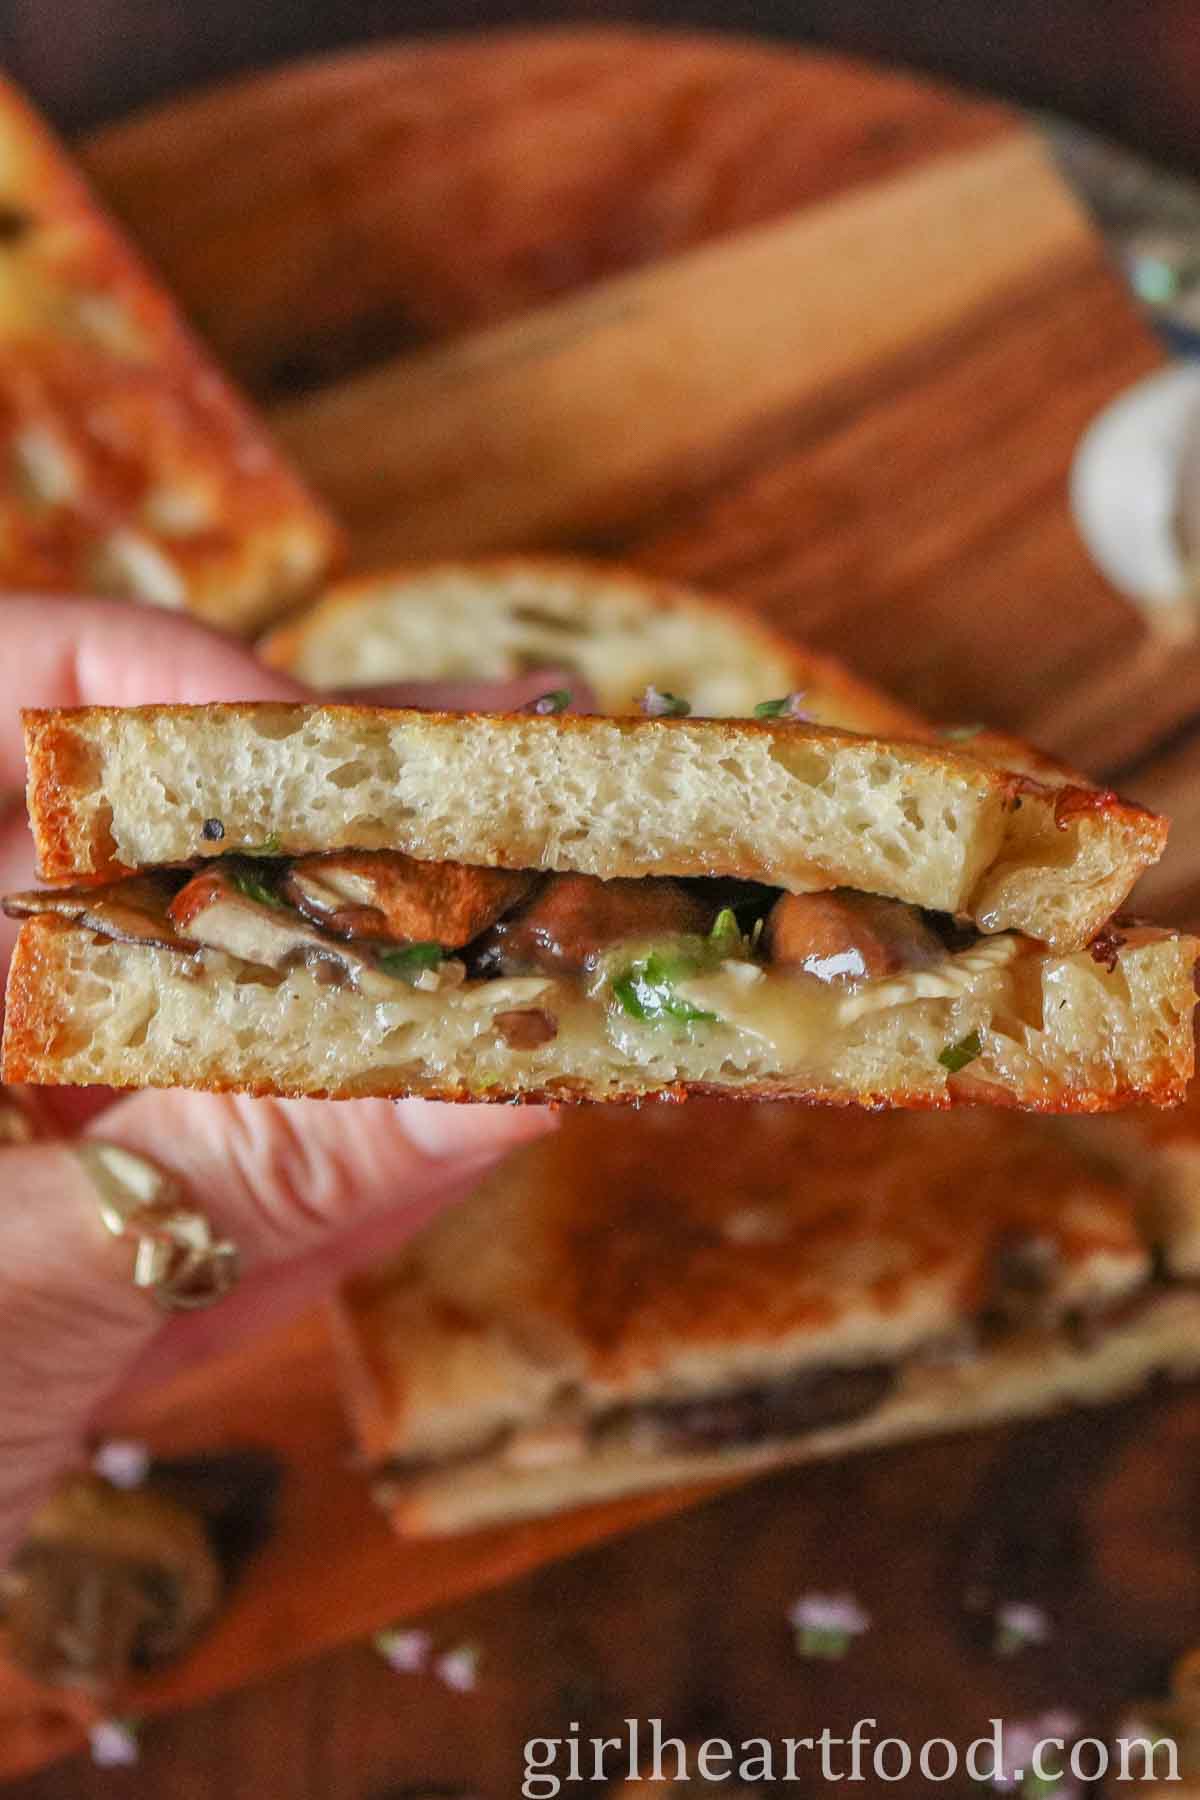 Hand holding half of a mushroom and Brie grilled cheese sandwich.